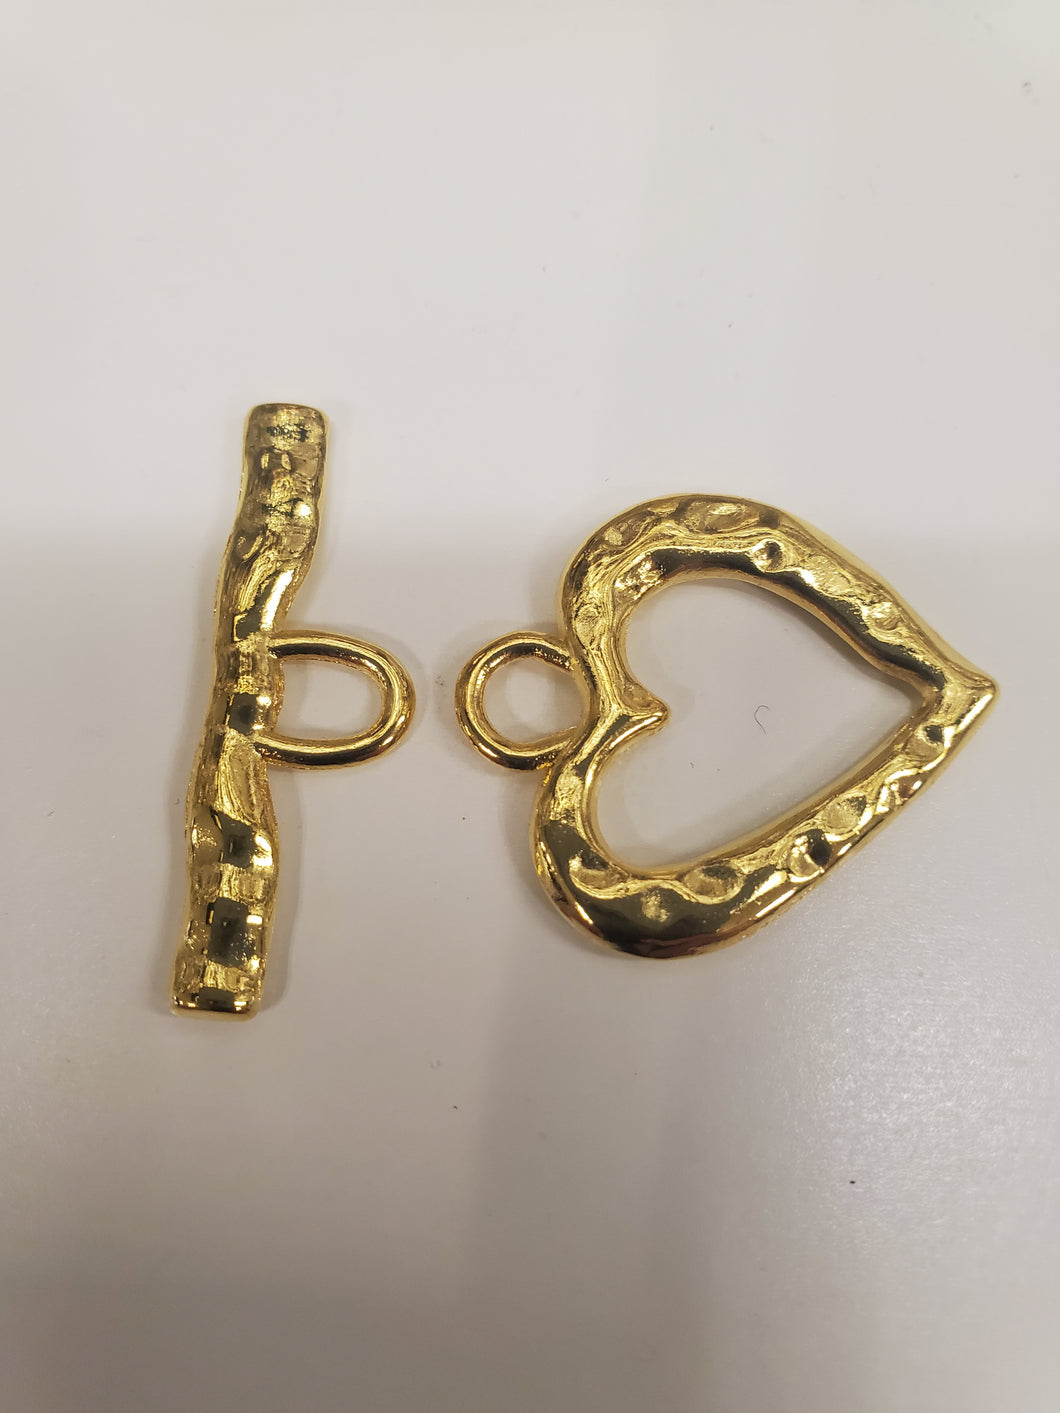 GOLDEN TOGGLE CLASP